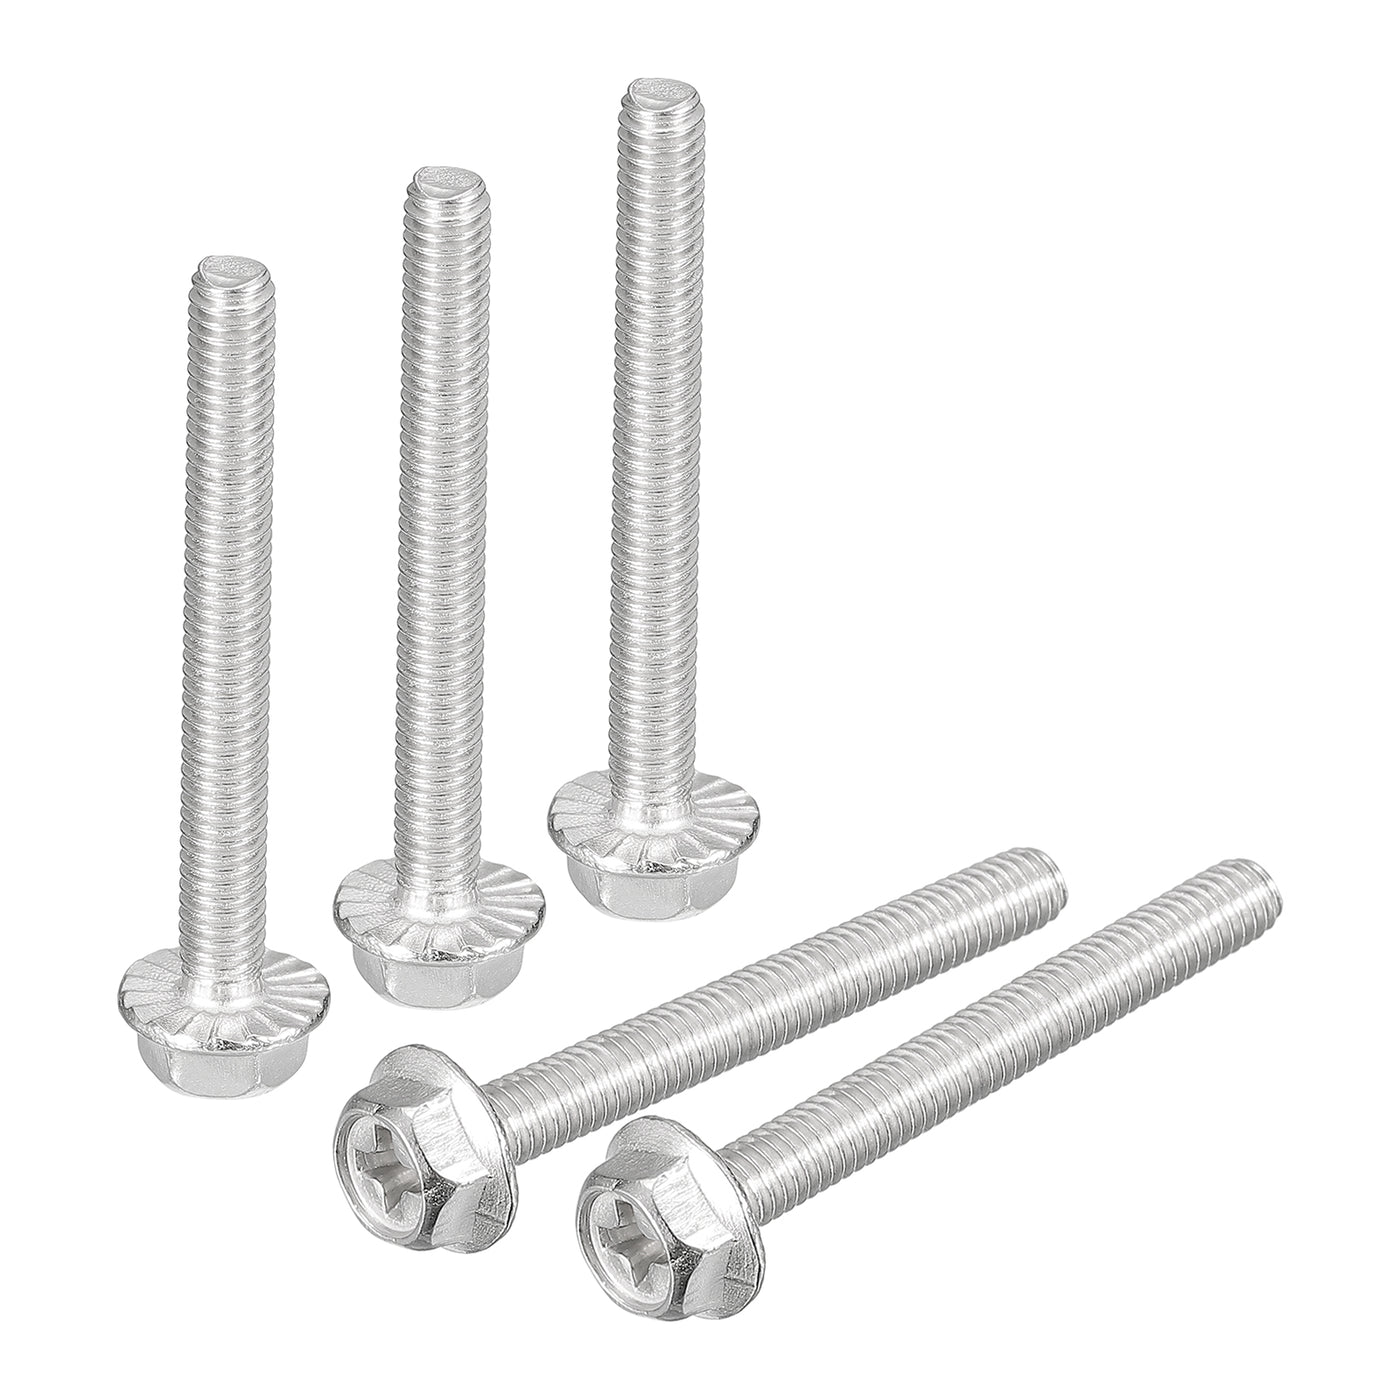 uxcell Uxcell M4x40mm Phillips Hex Head Flange Bolts, 10pcs 304 Stainless Steel Screws